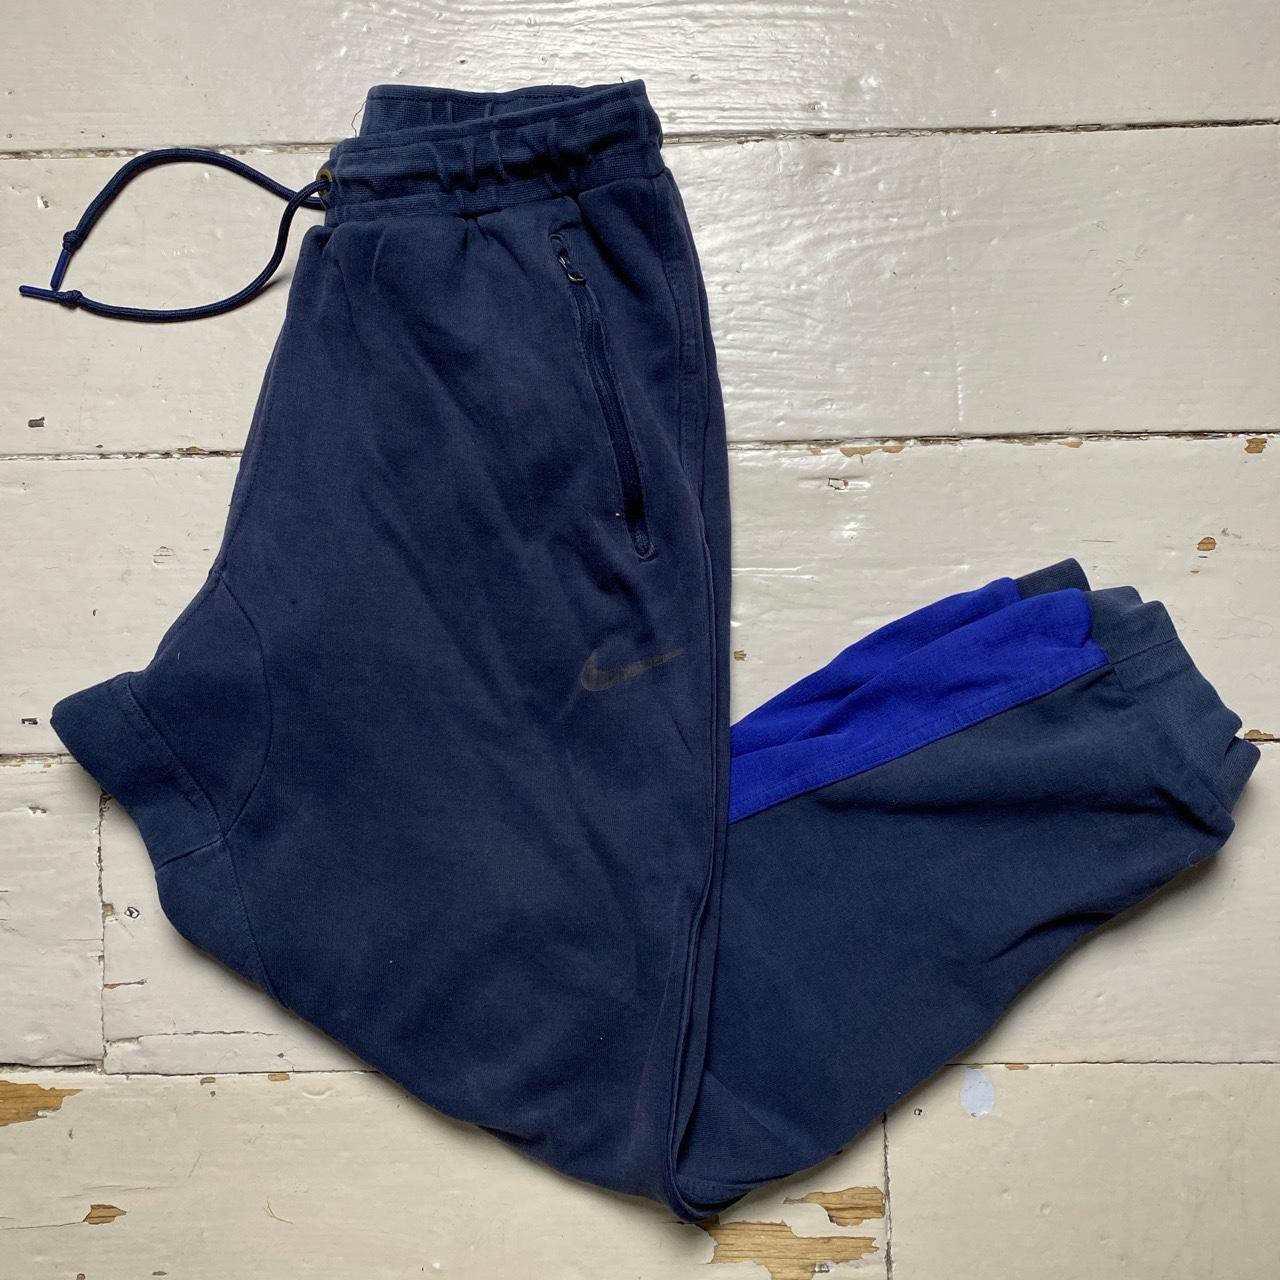 Nike Swoosh Navy and Black Joggers